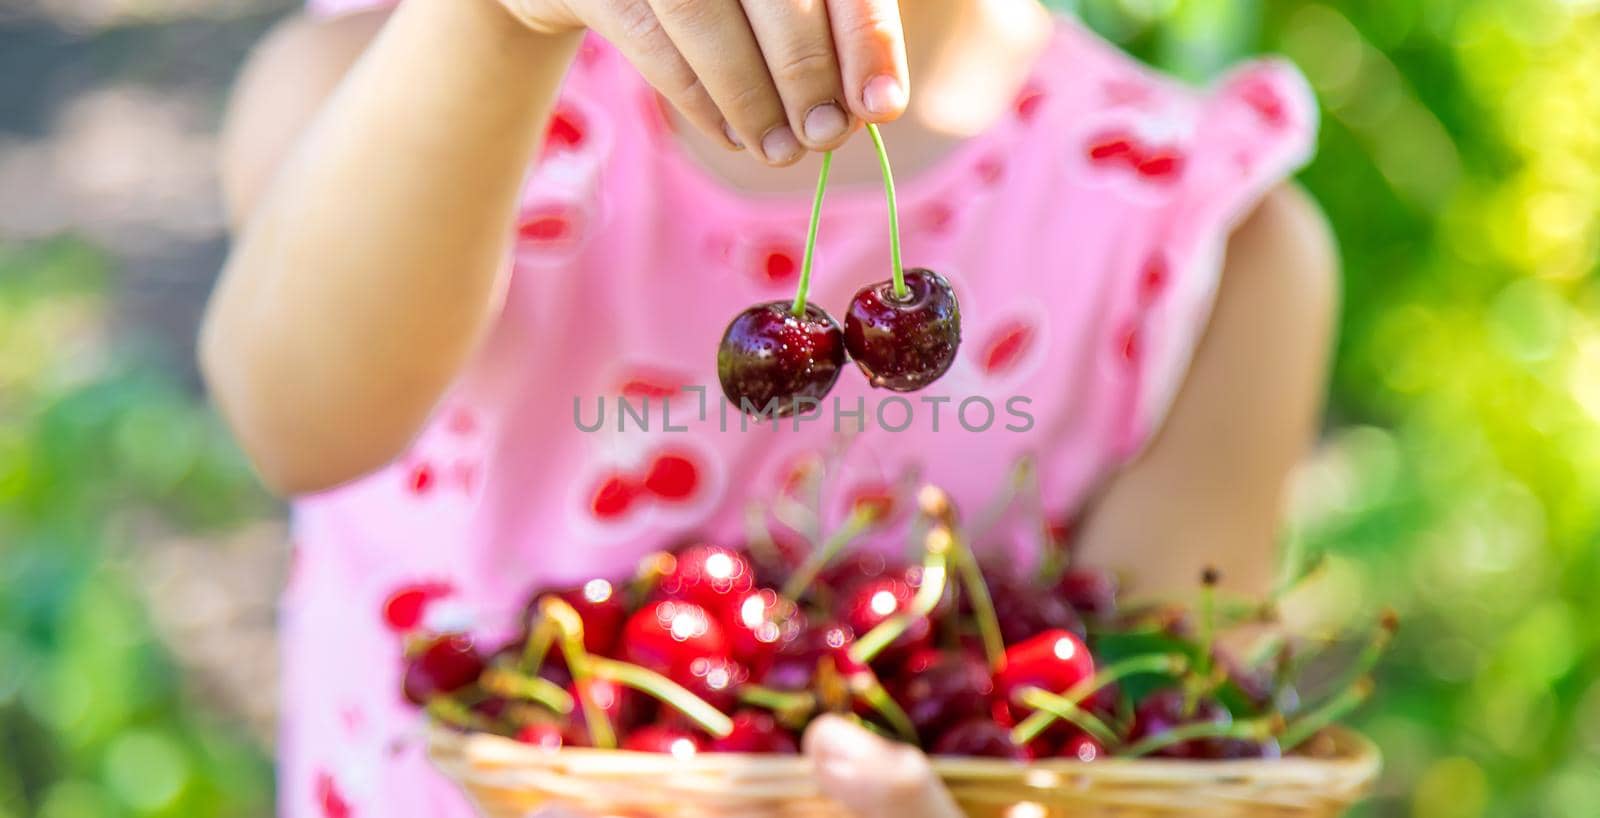 A child harvests cherries in the garden. Selective focus. by yanadjana